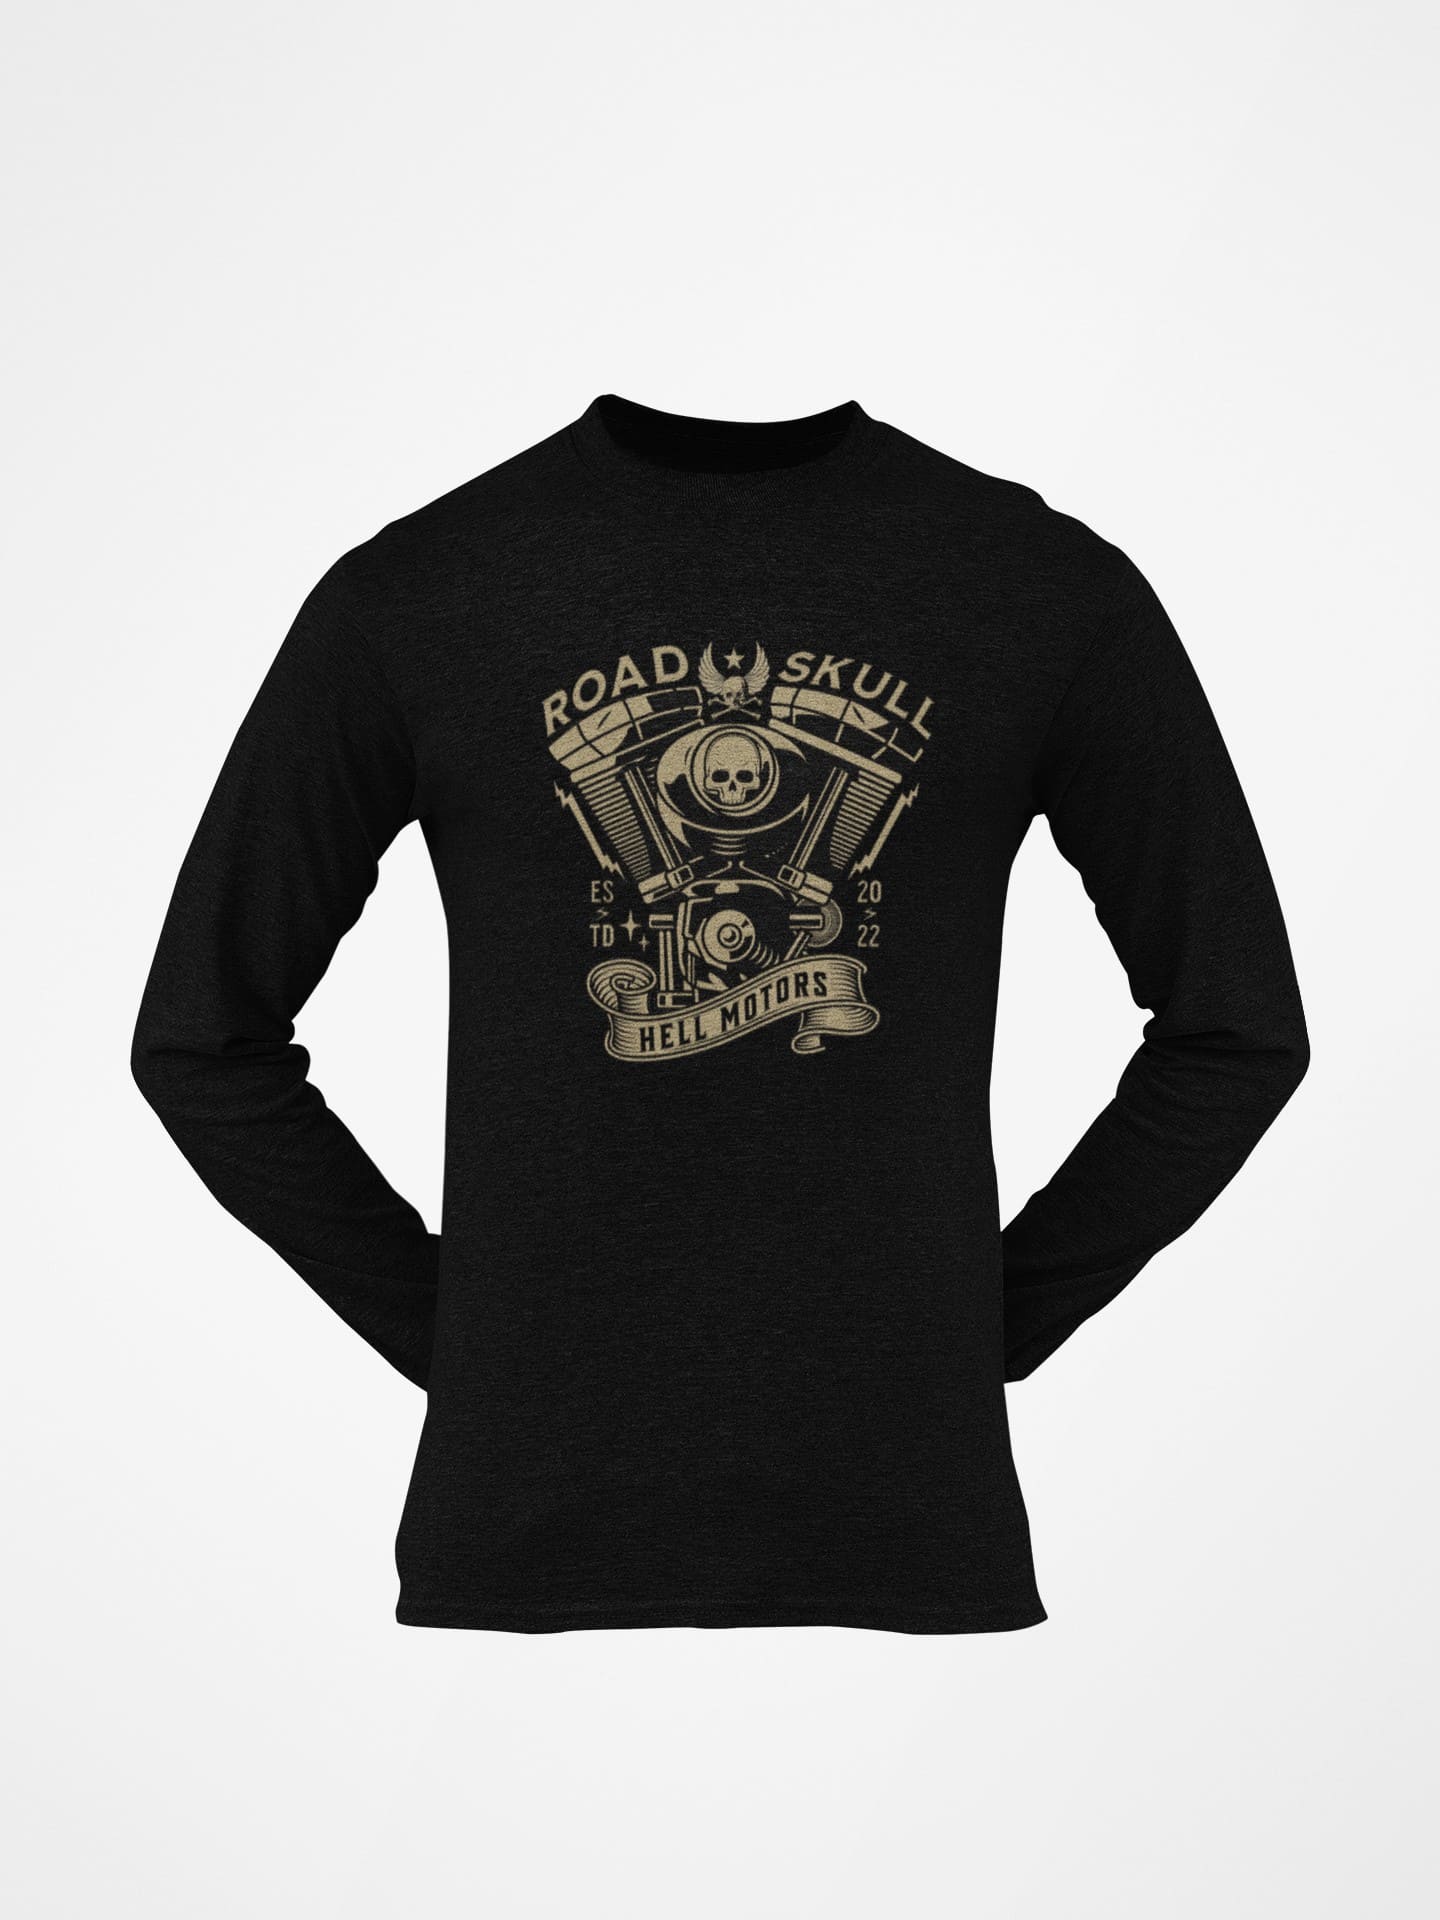 Biker-themed long sleeve tee in black with a captivating motorcycle illustration